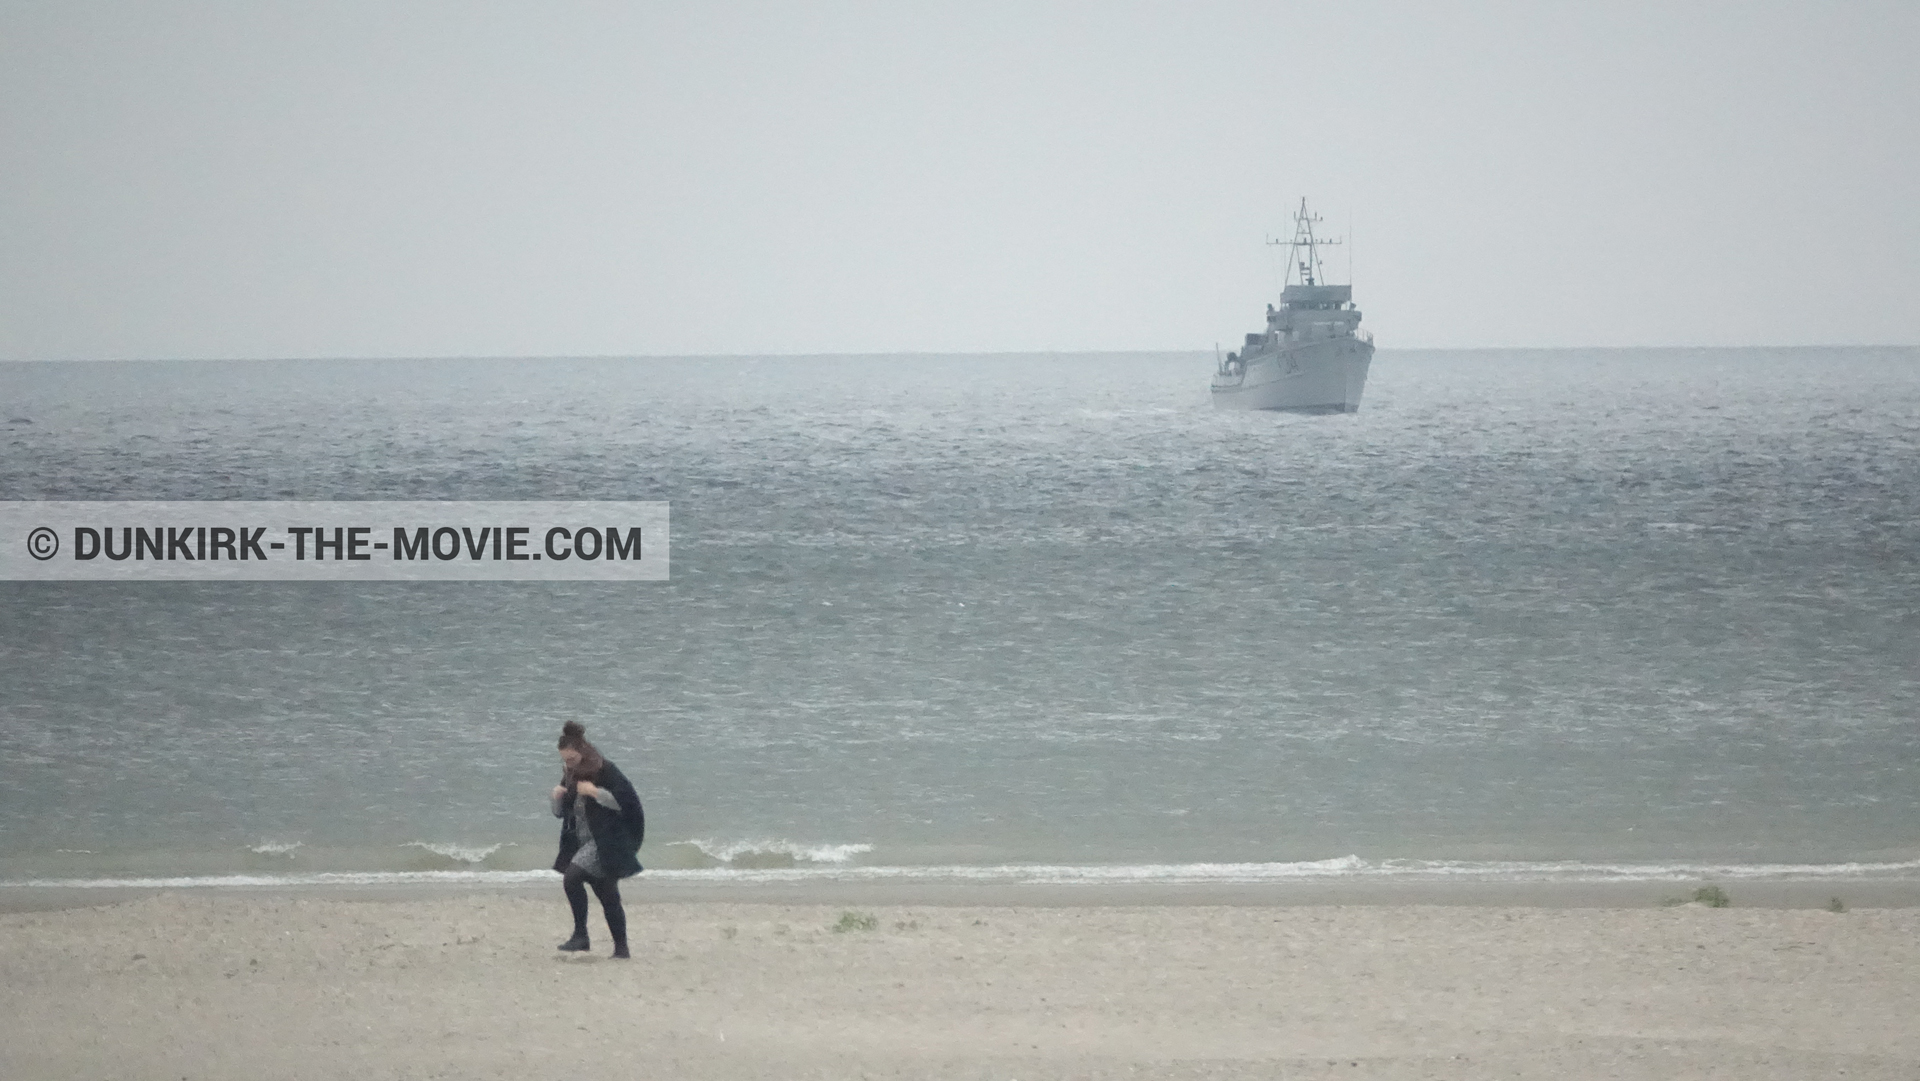 Picture with boat, grey sky, beach,  from behind the scene of the Dunkirk movie by Nolan